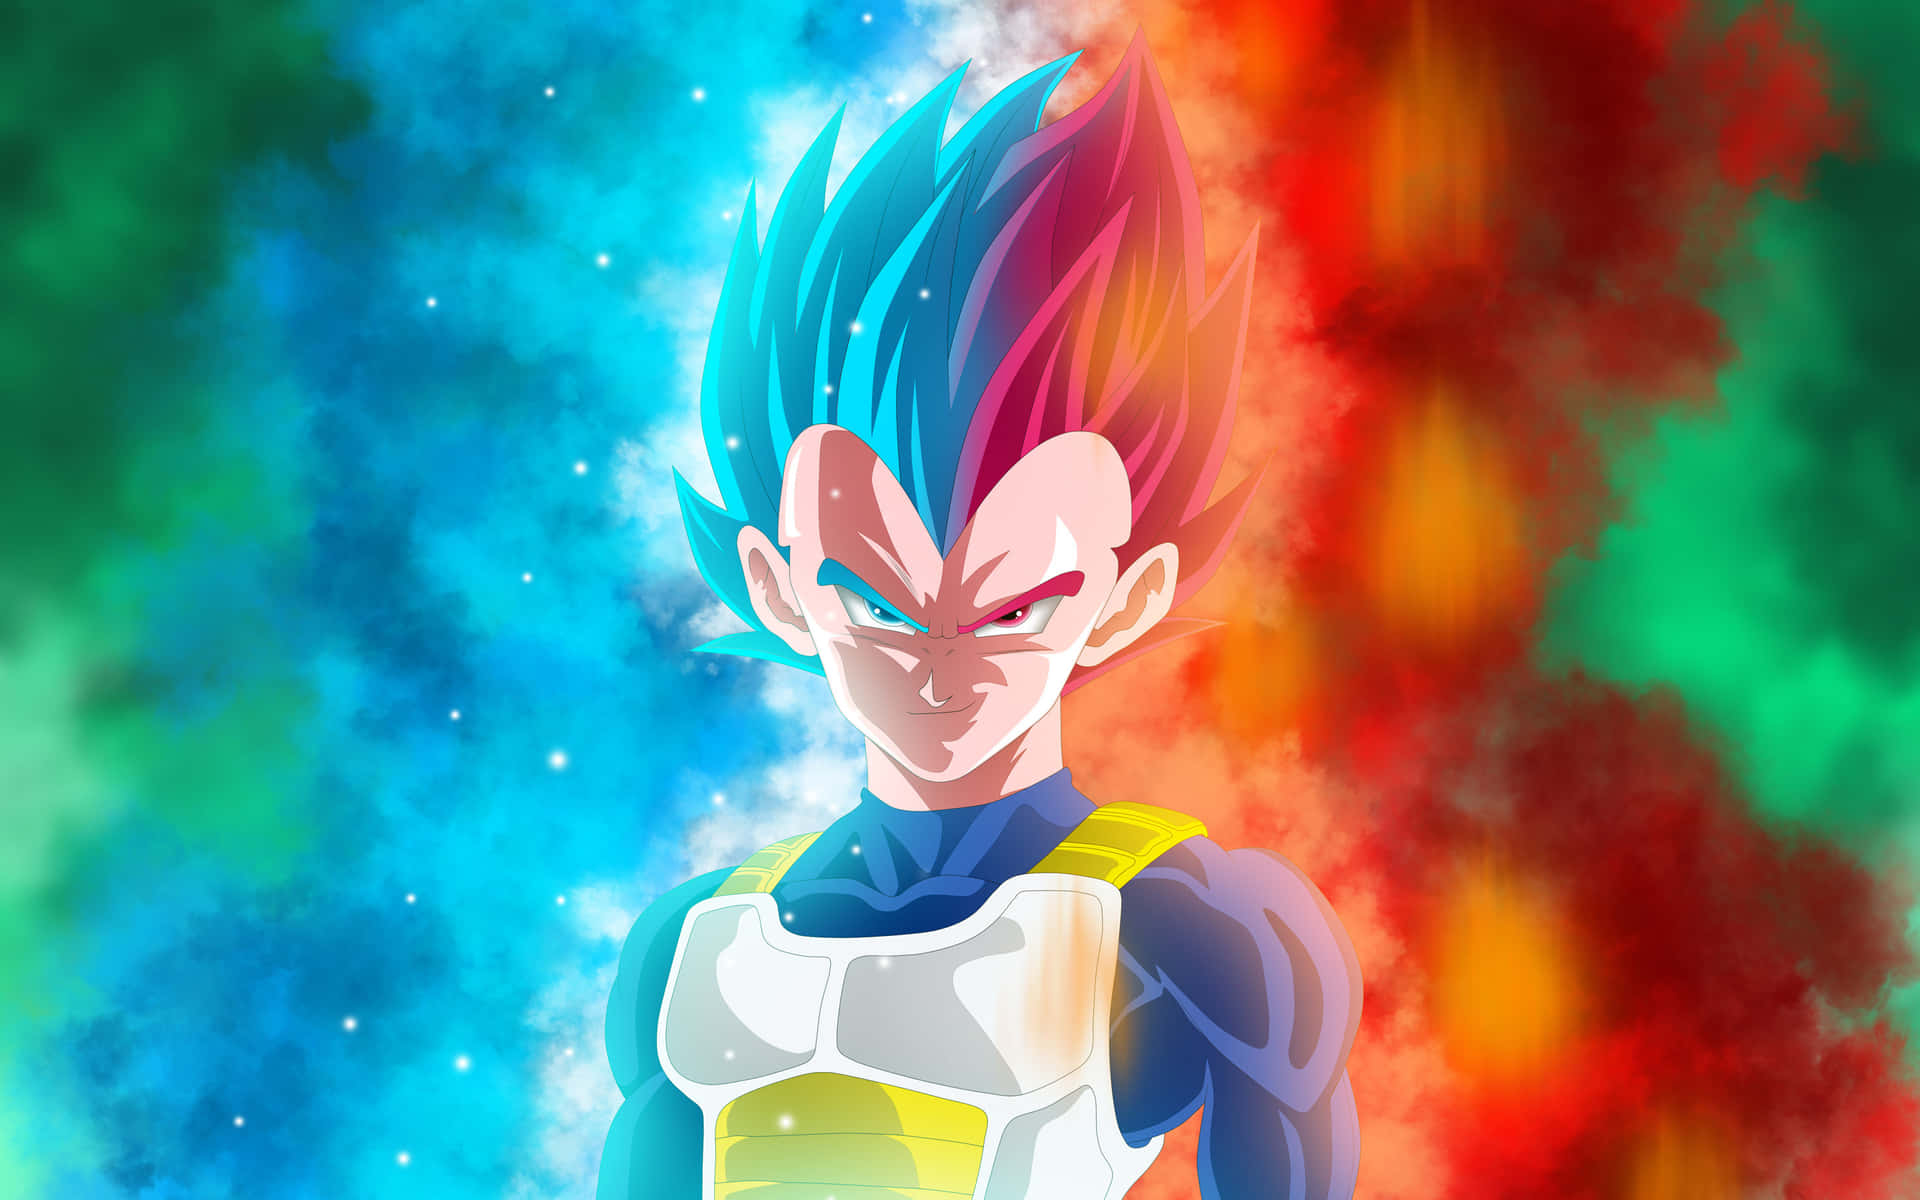 Show off your Saiyan power with this iconic Cool Vegeta wallpaper. Wallpaper